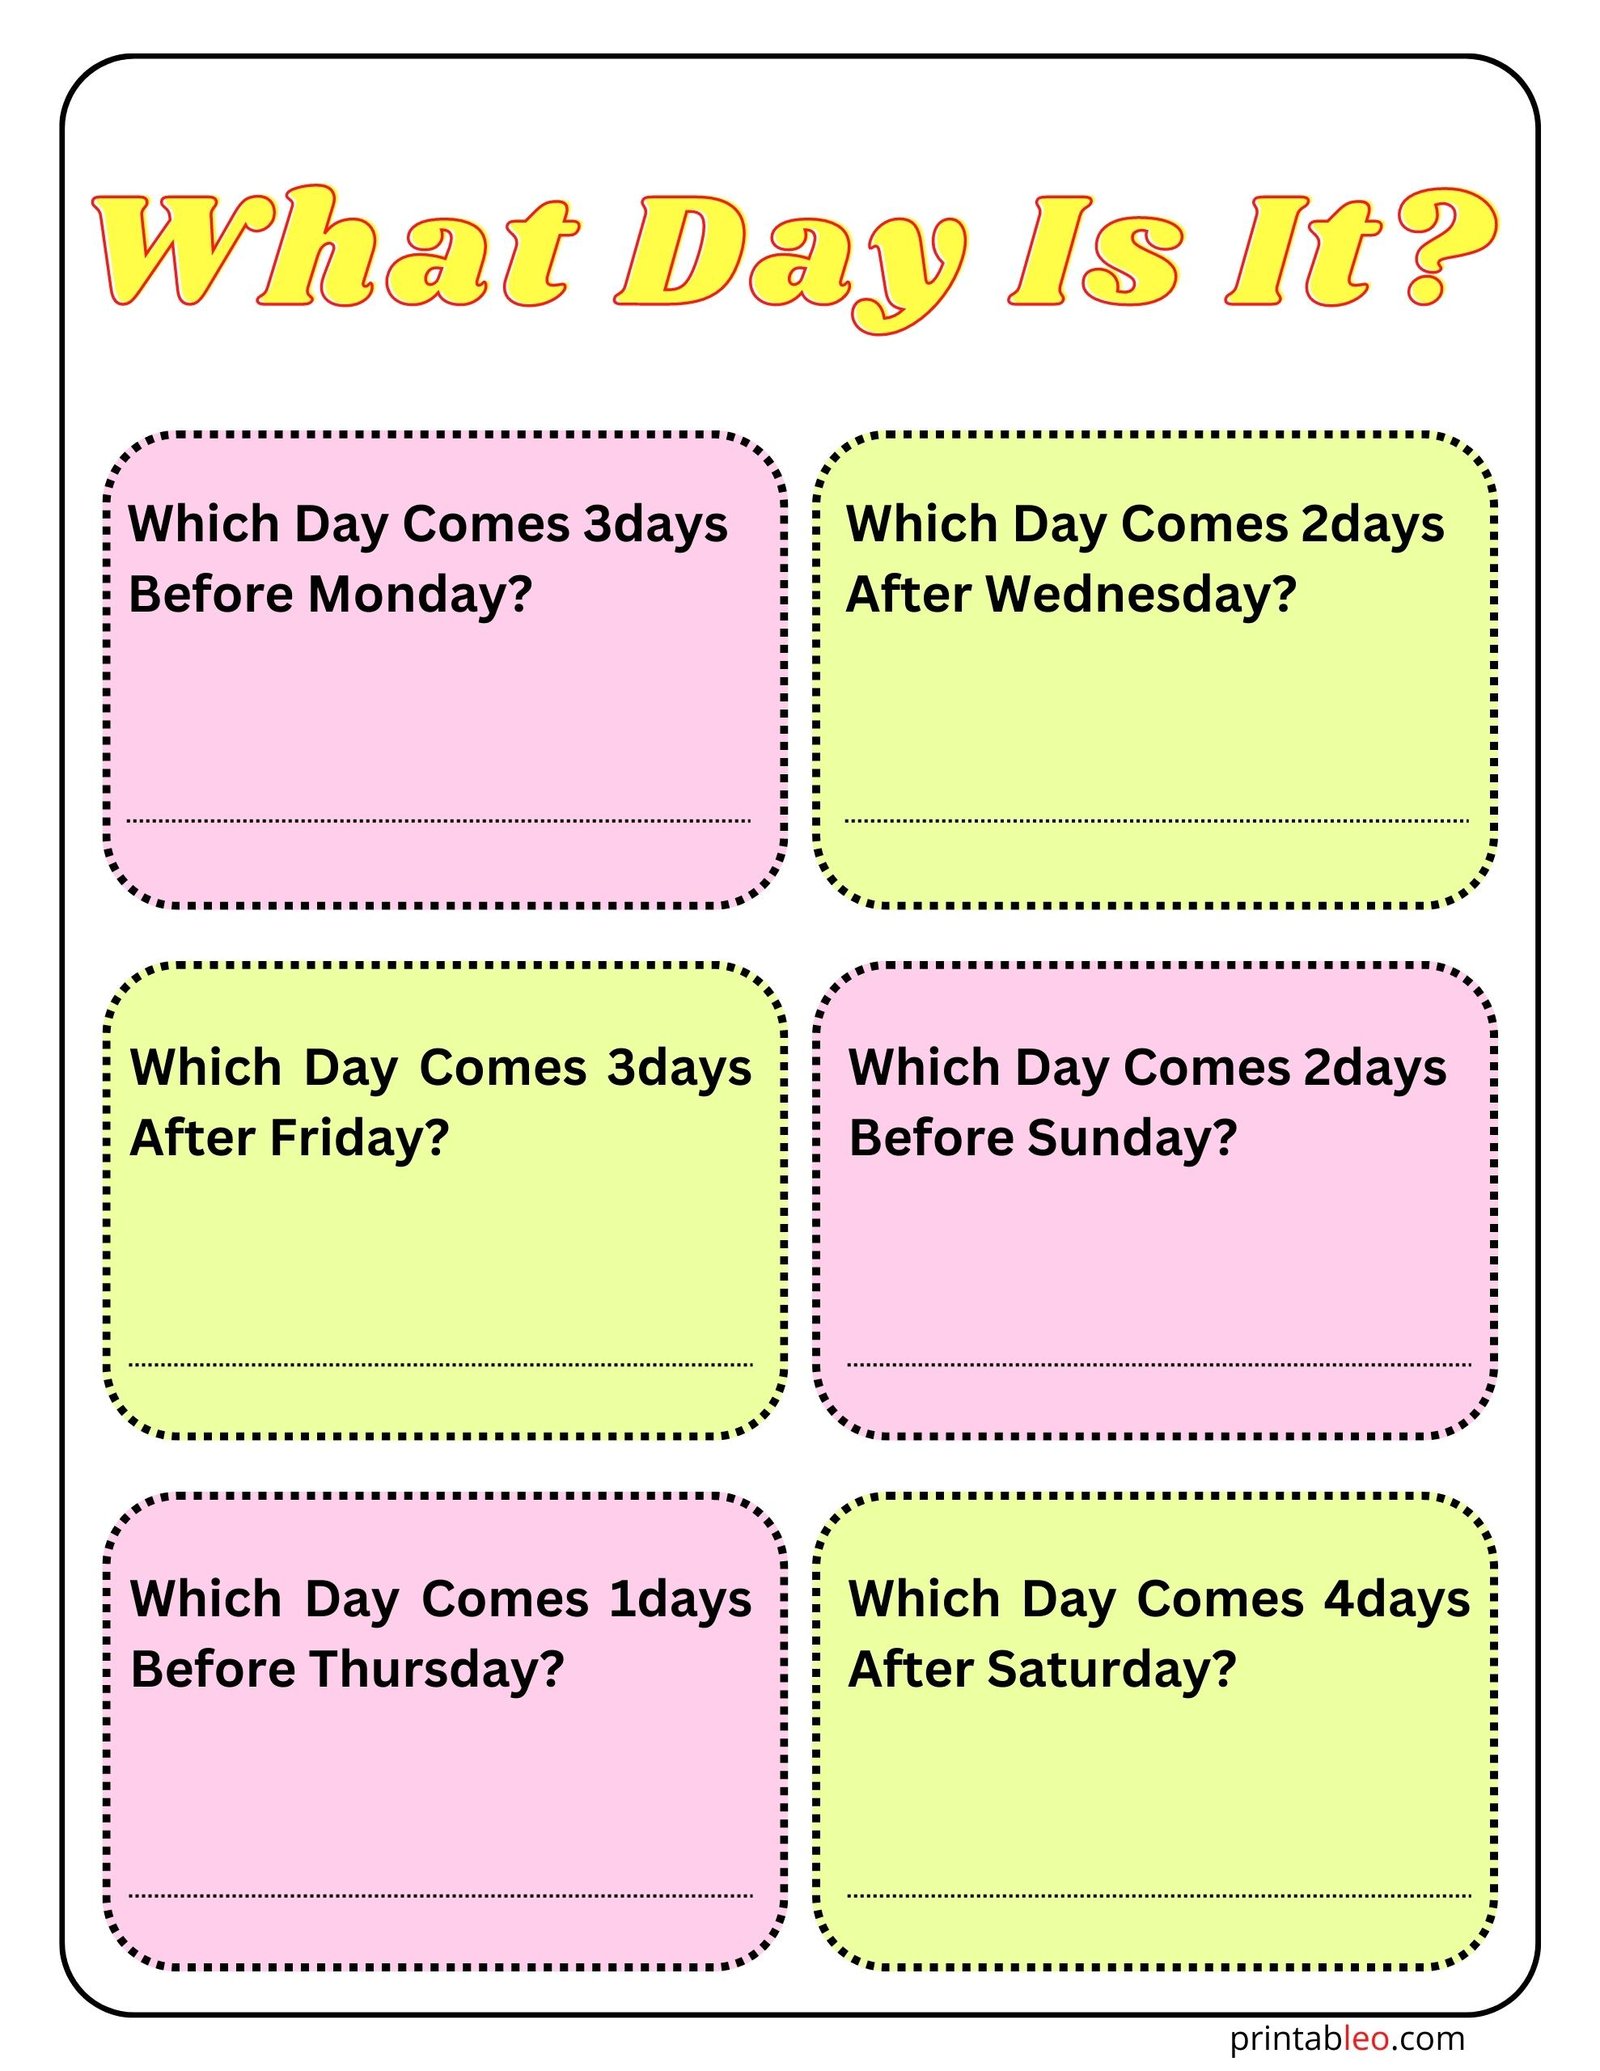 Printable What Day is it Worksheet